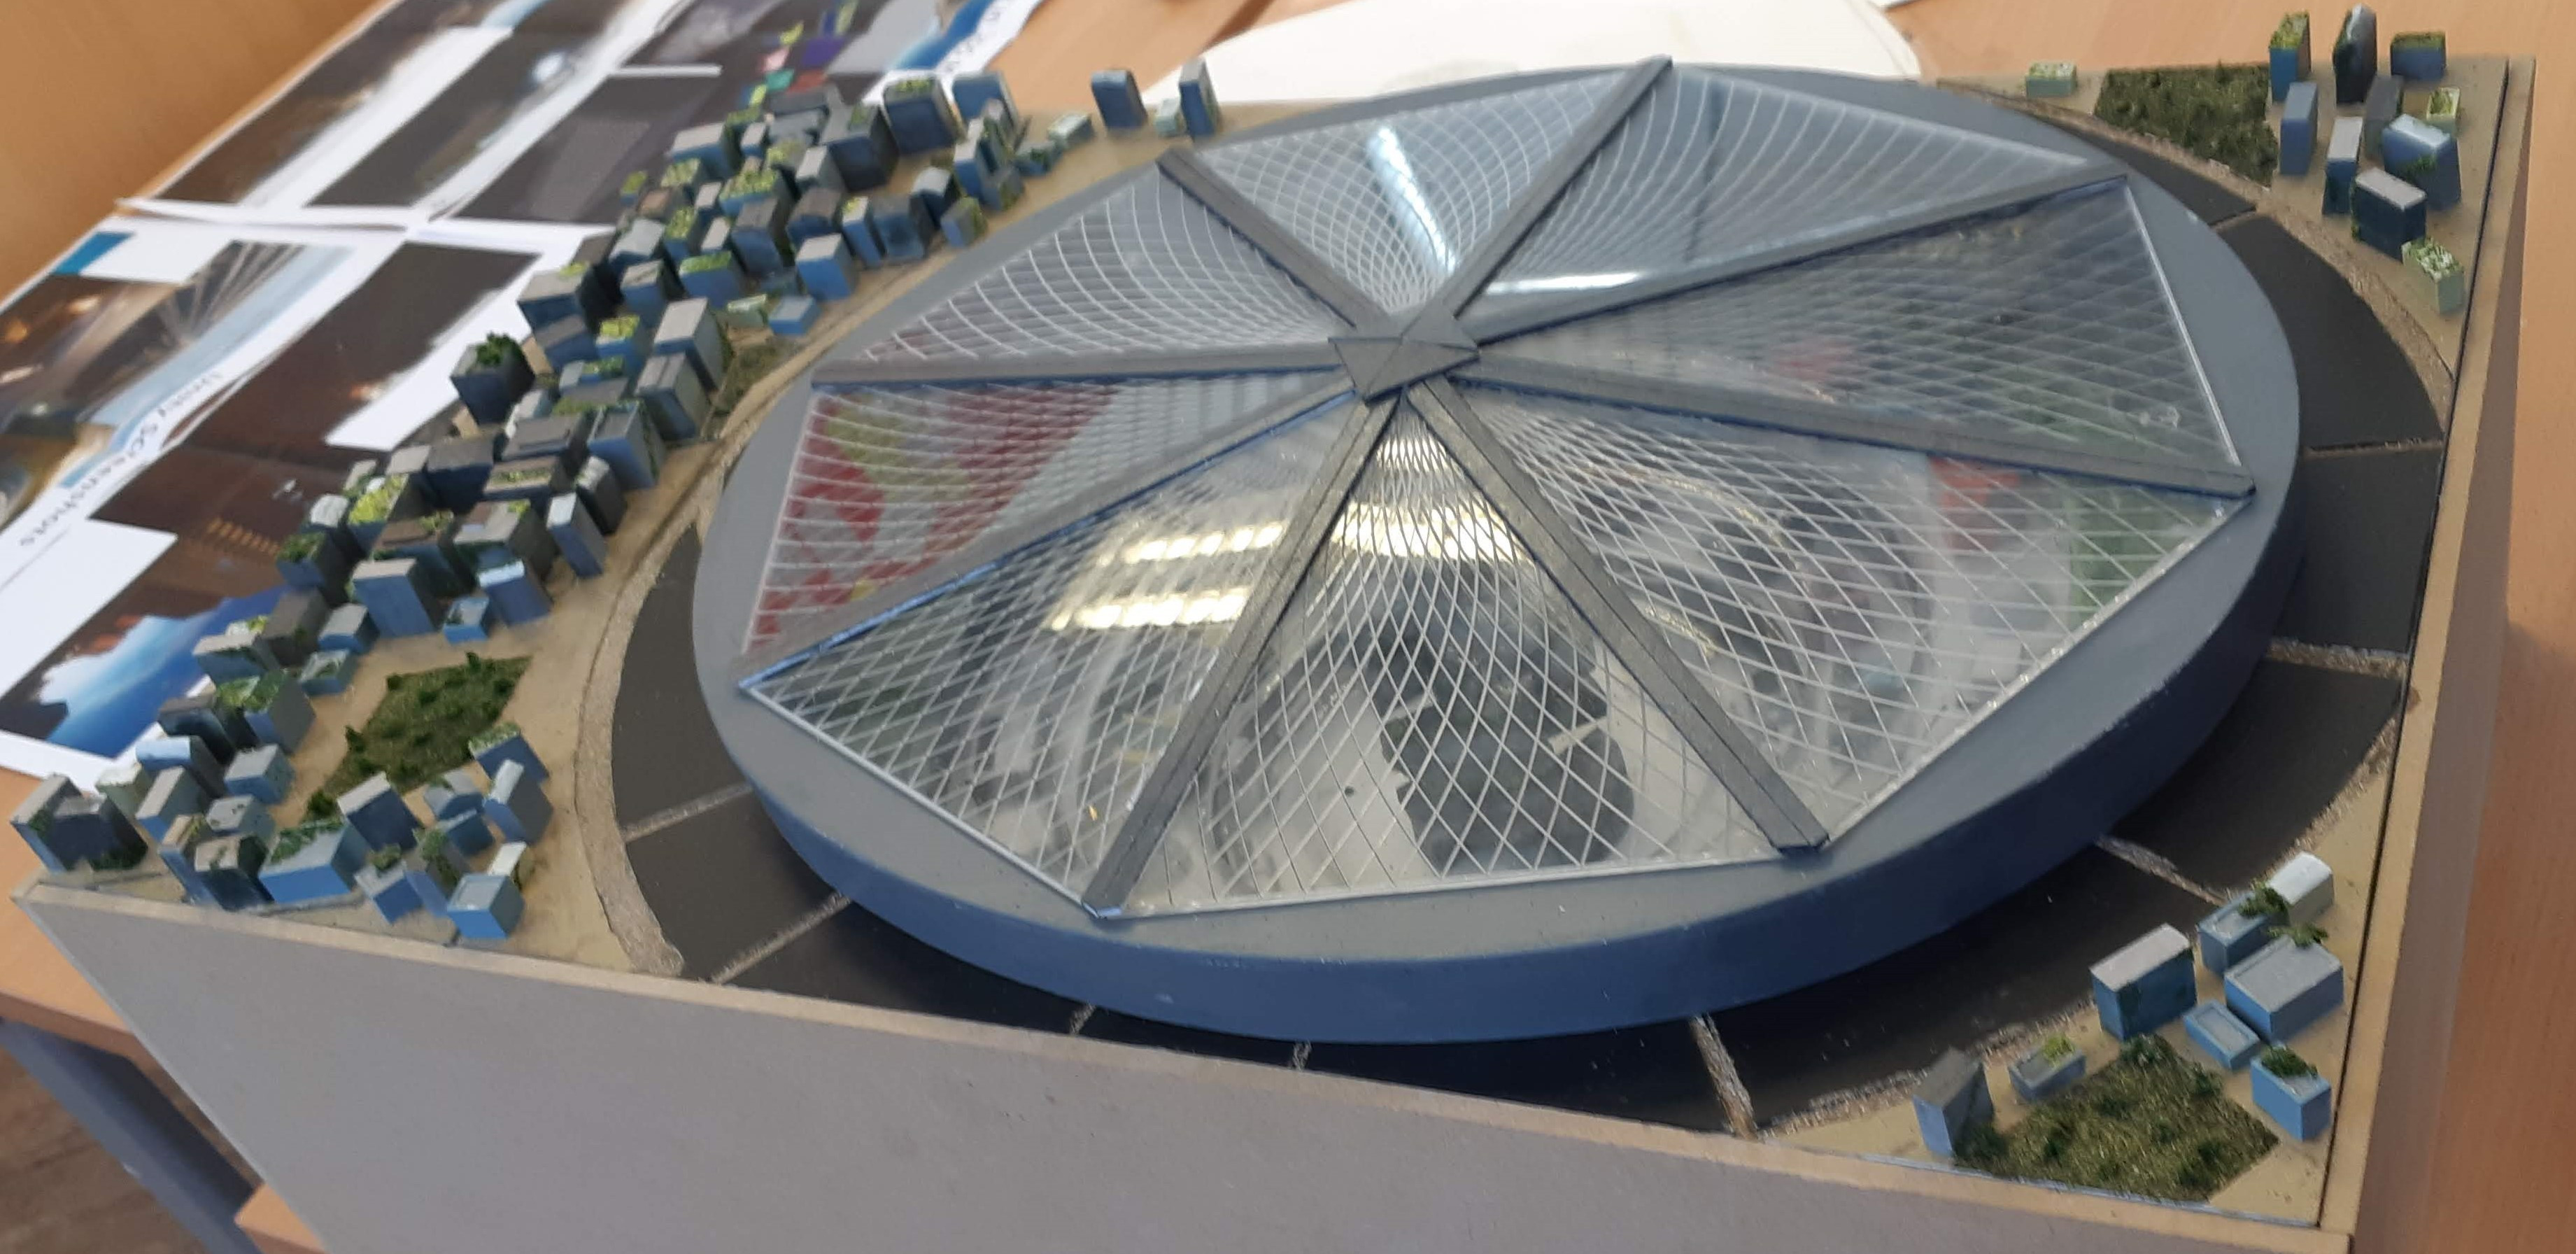 Full model of the dome and city